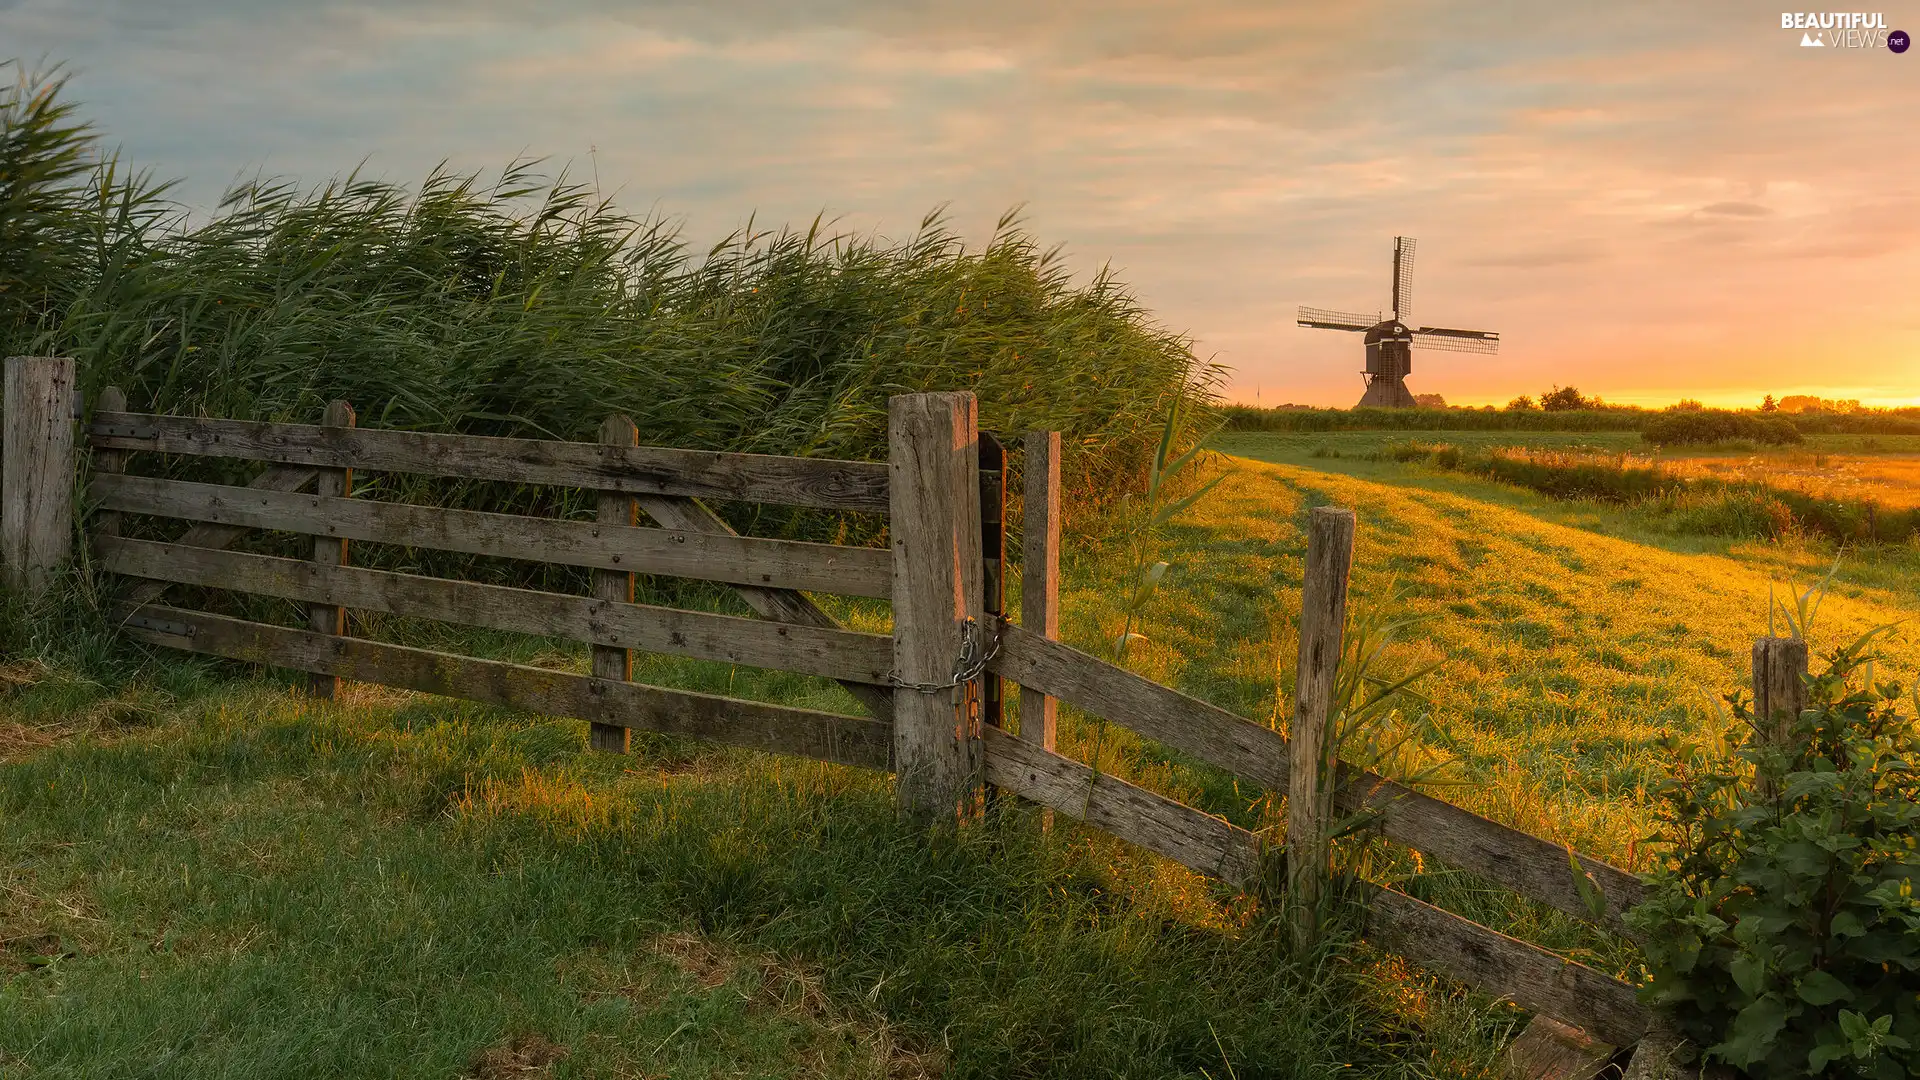 Plants, fence, Windmill, Meadow, Great Sunsets